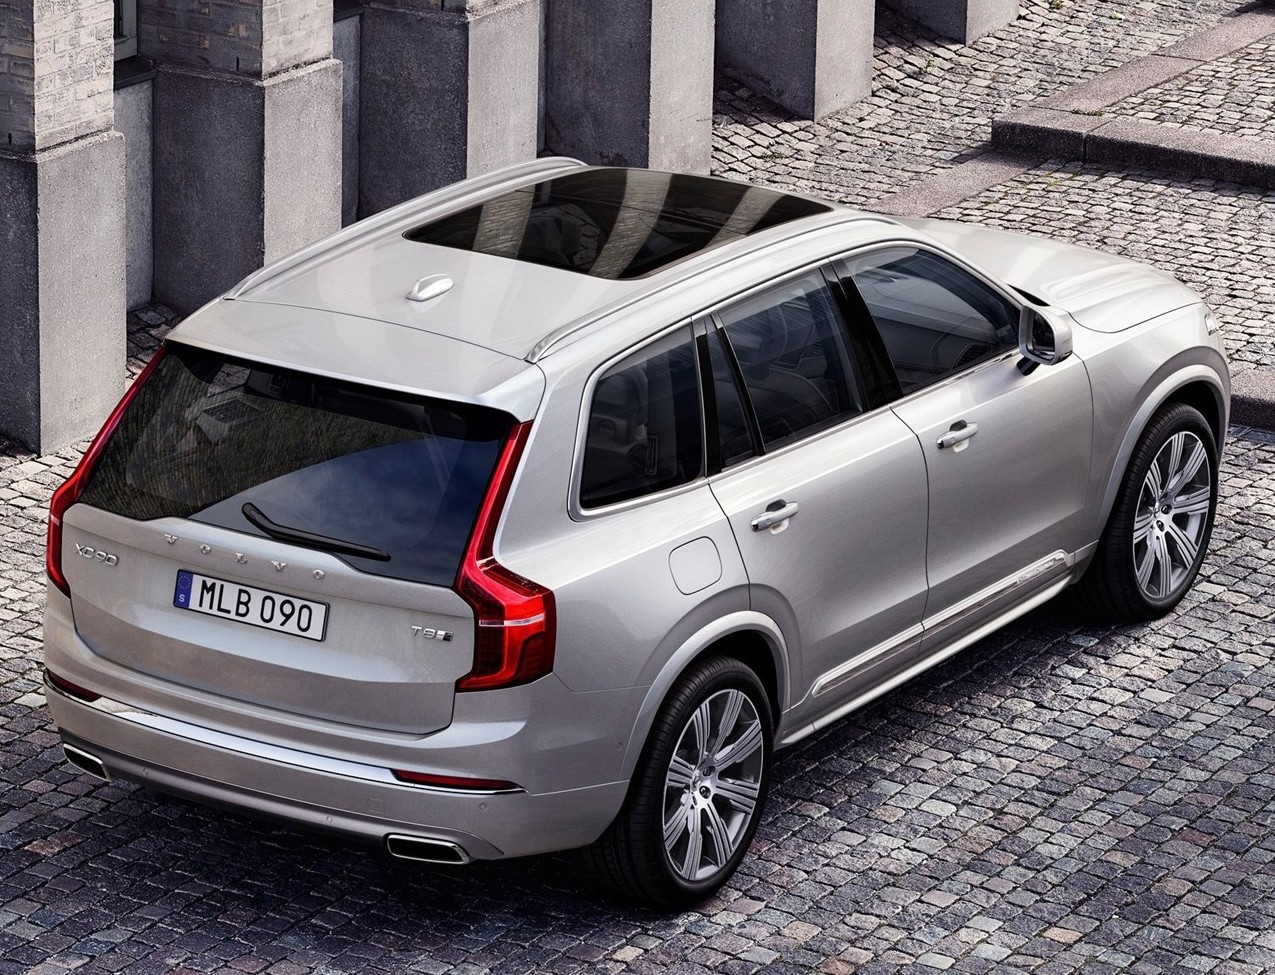 Volvo XC90 SUV Gets F1-Style KERS Braking System – 6th Gear Automotive ...